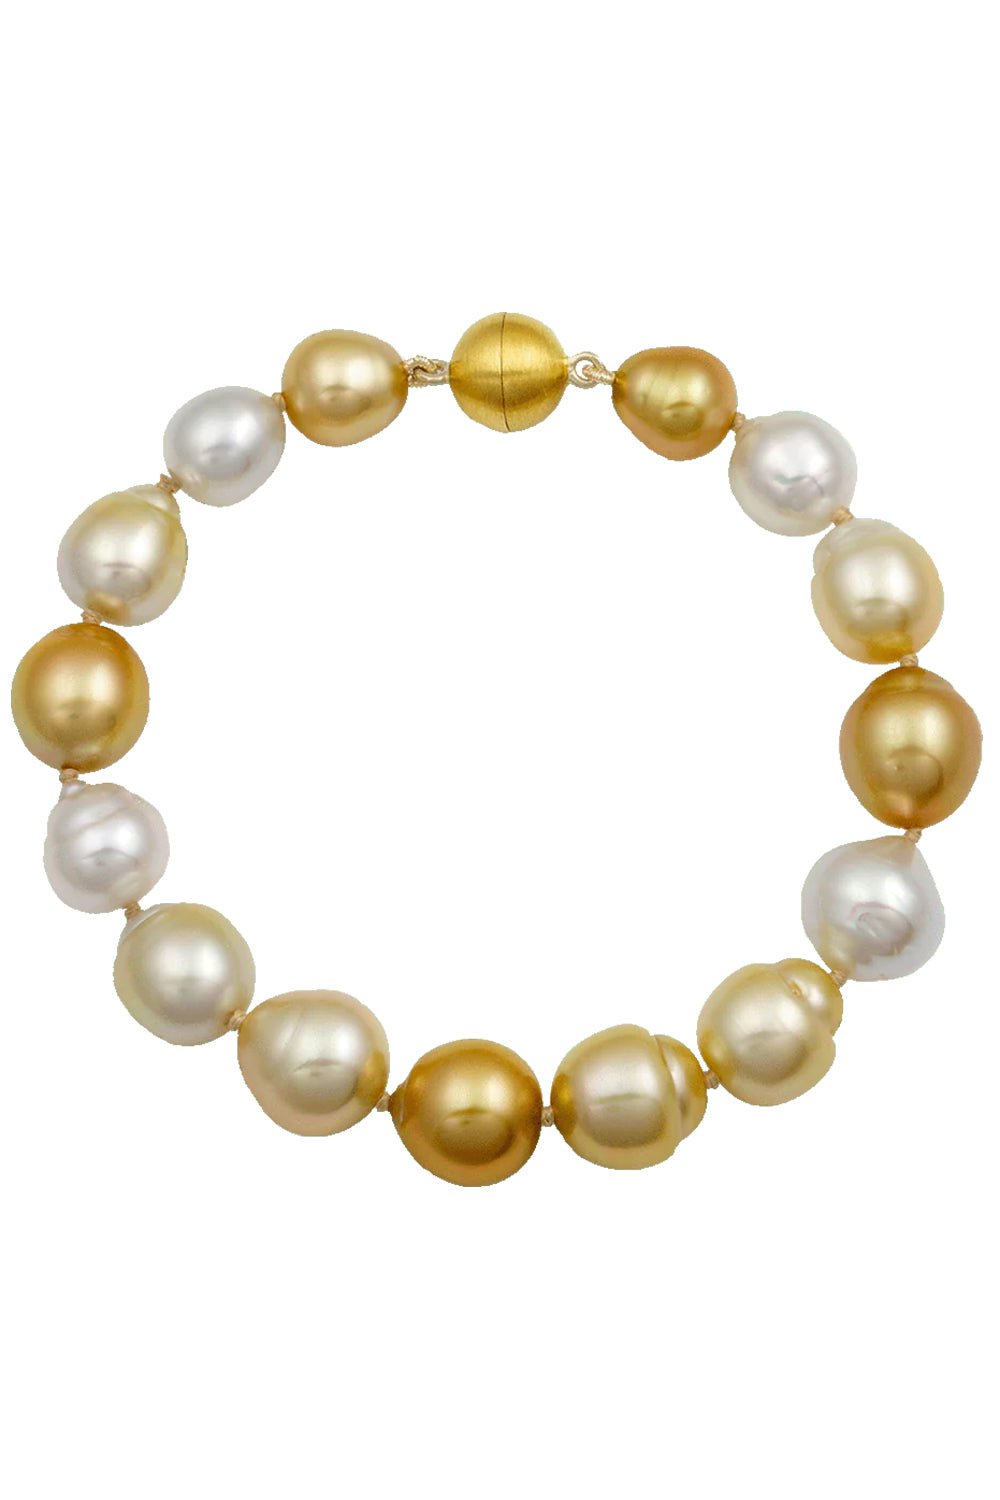 BAGGINS-Gold And White South Sea Pearl Bracelet-YELLOW GOLD